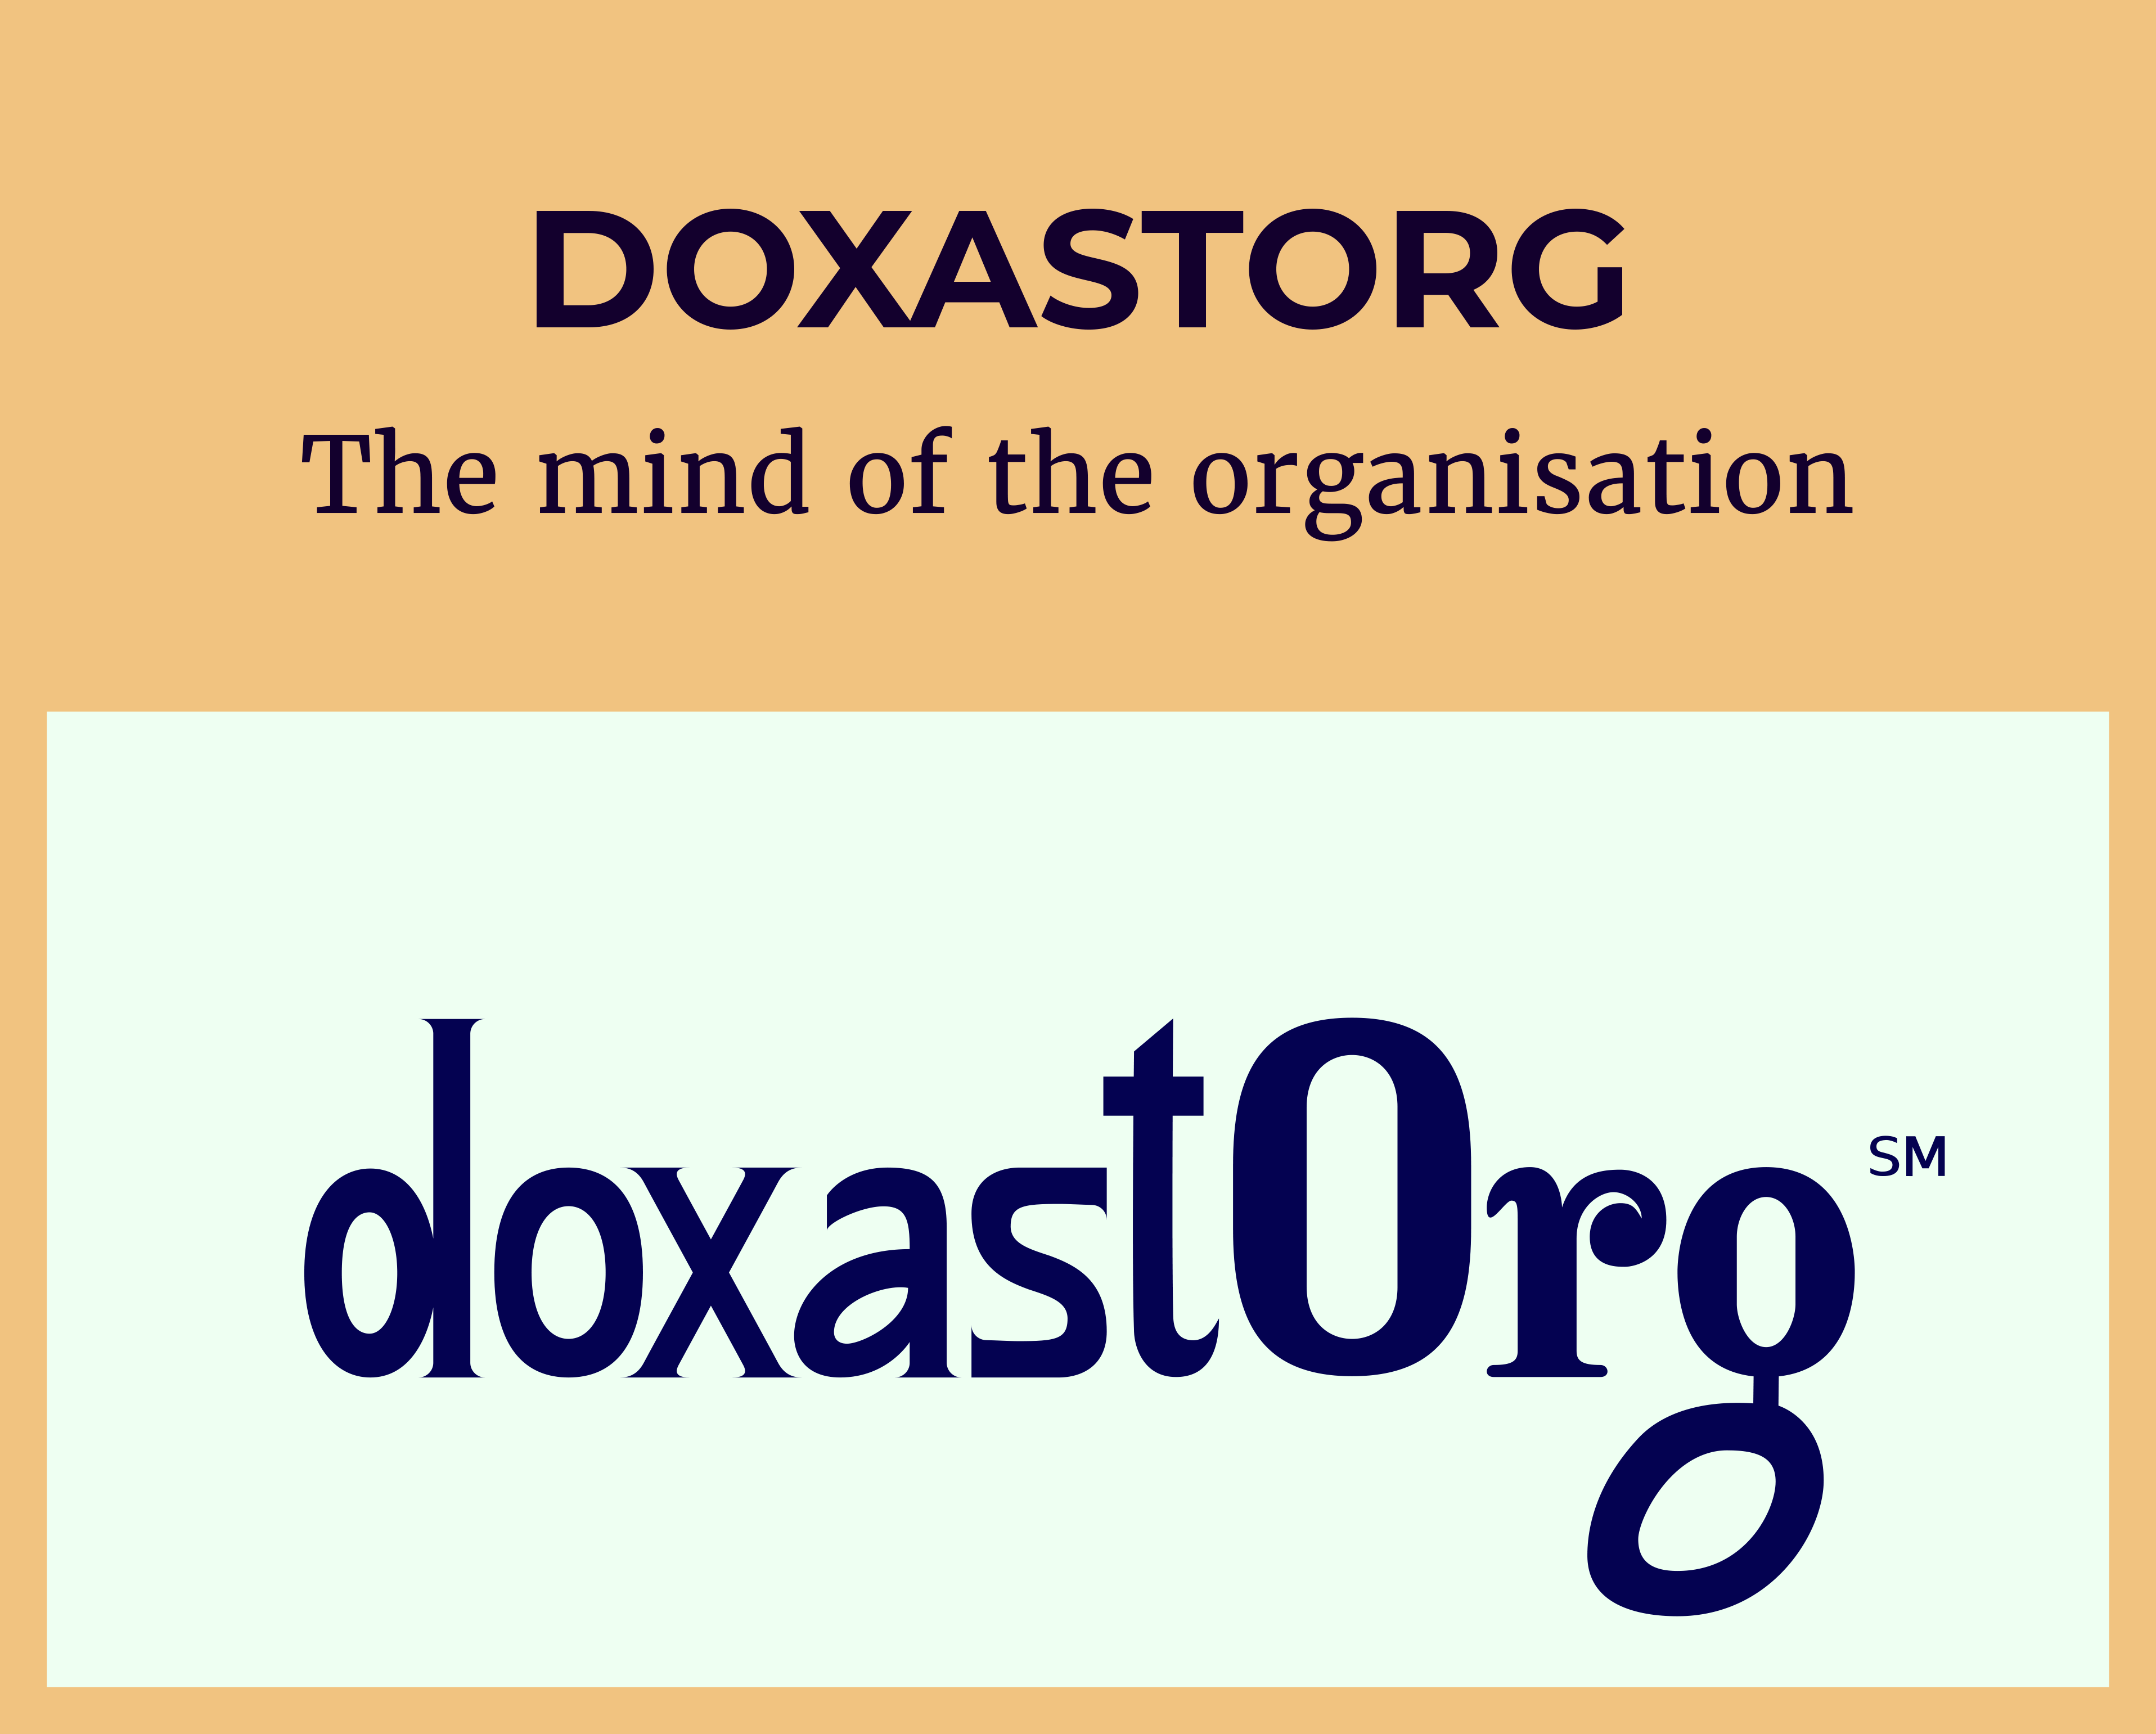 Logo of DOXASTORG - the technology that reads the mind of the organisation